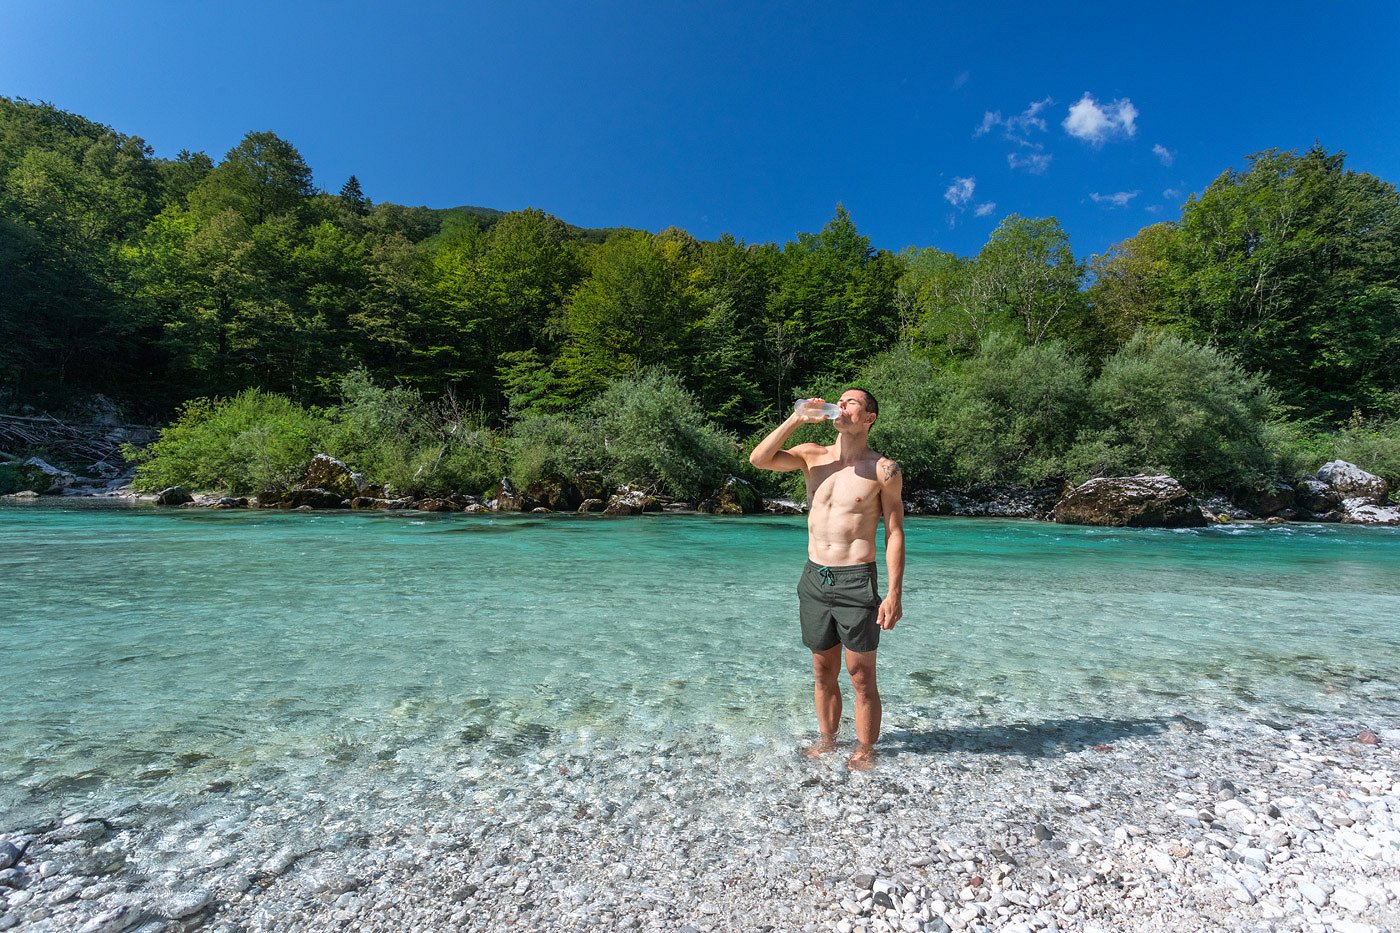 A tourist in a bathing suit stands in the Soča River and drinks water from a bottle